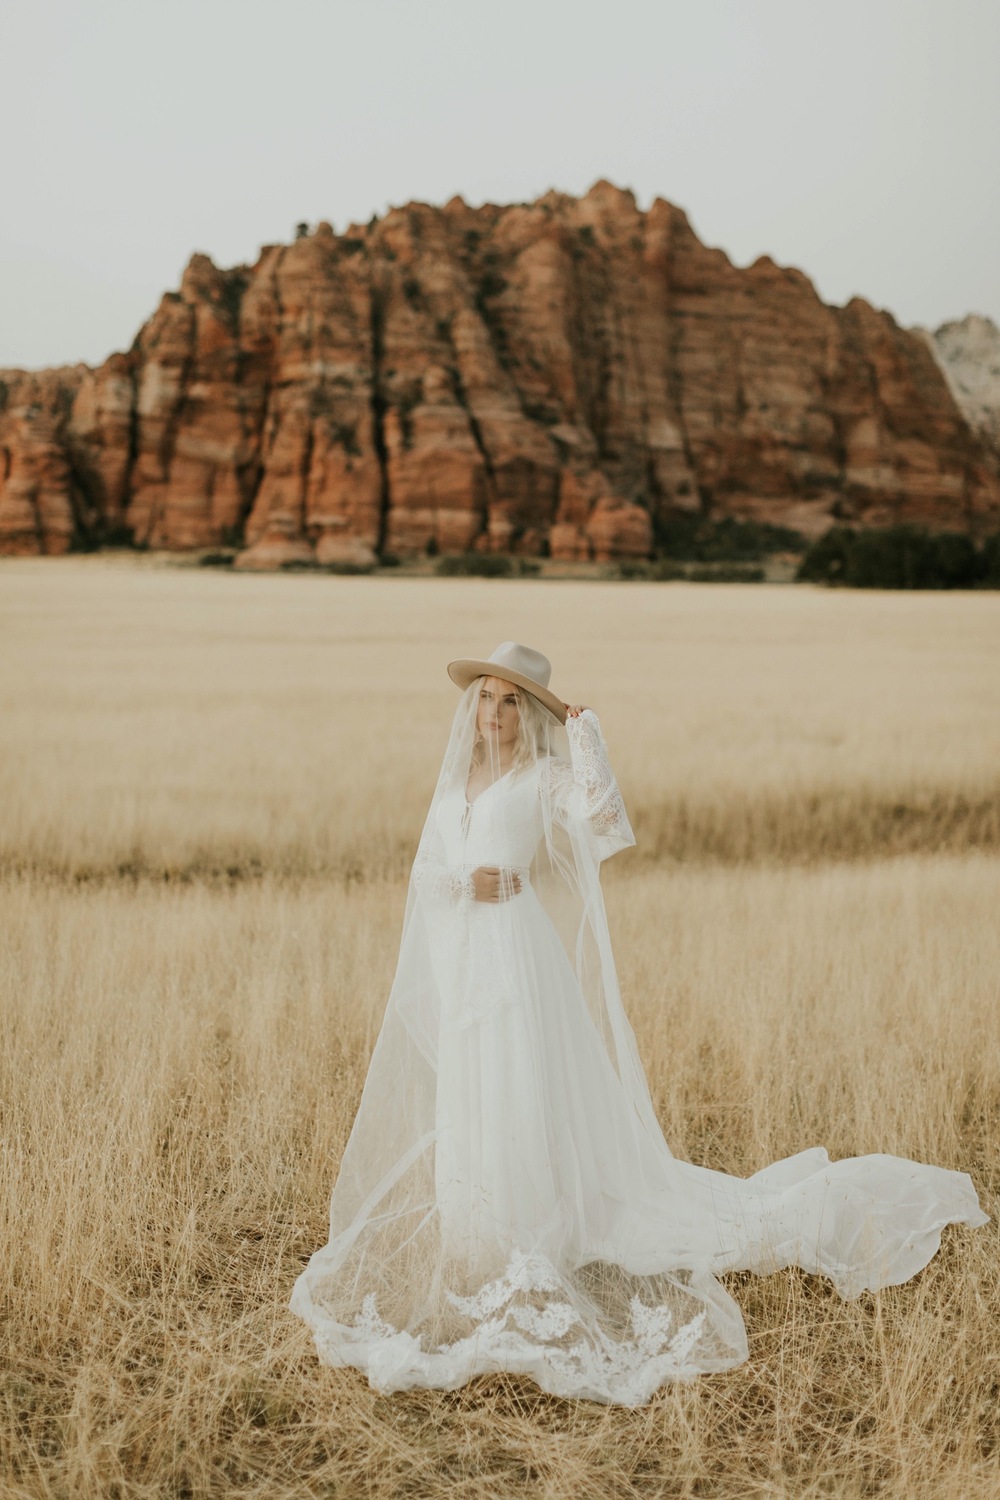 Find Your Perfect Western Wedding Hat At These Rocky Mountain